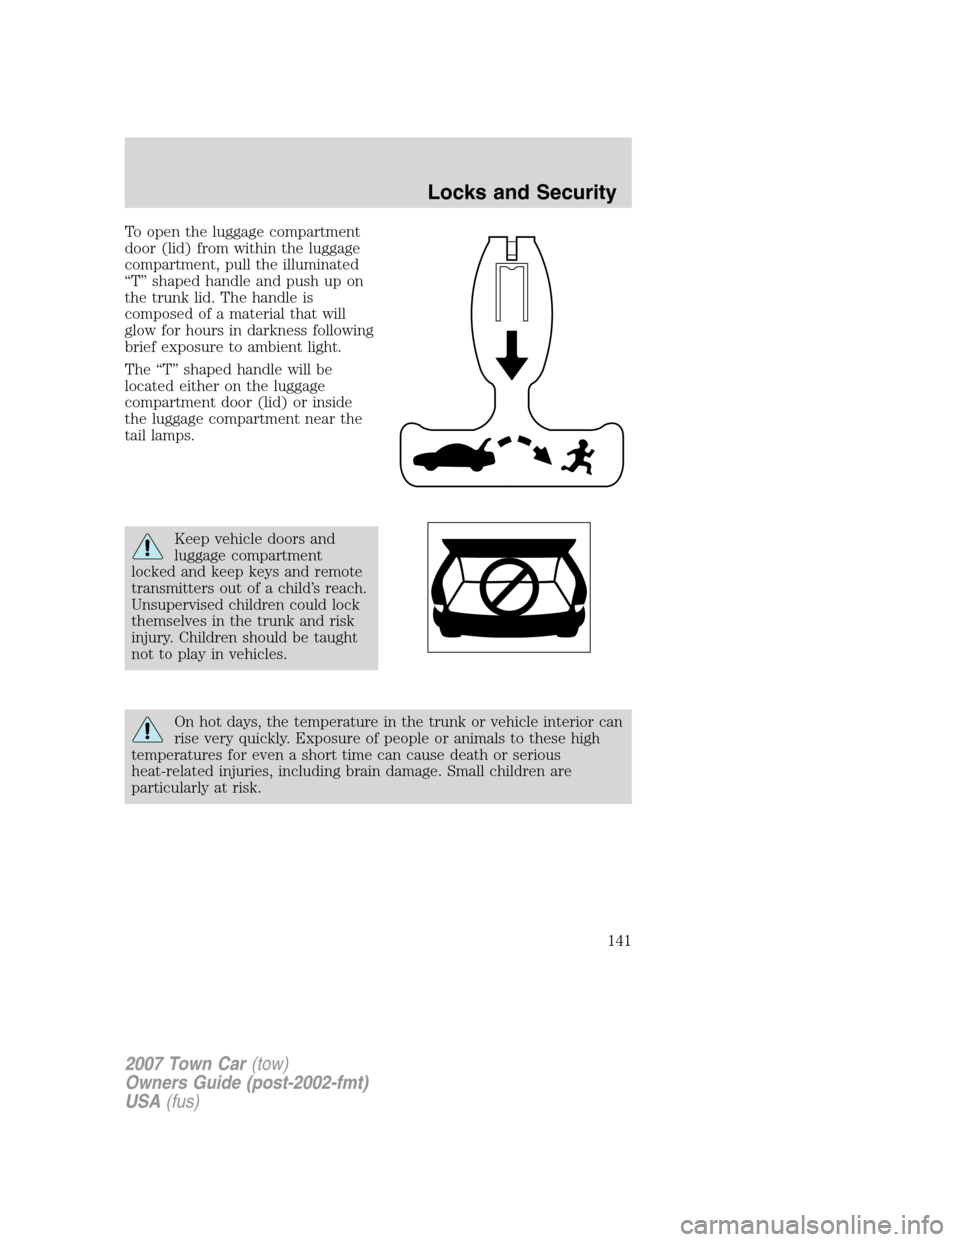 LINCOLN TOWN CAR 2007  Owners Manual To open the luggage compartment
door (lid) from within the luggage
compartment, pull the illuminated
“T” shaped handle and push up on
the trunk lid. The handle is
composed of a material that will
